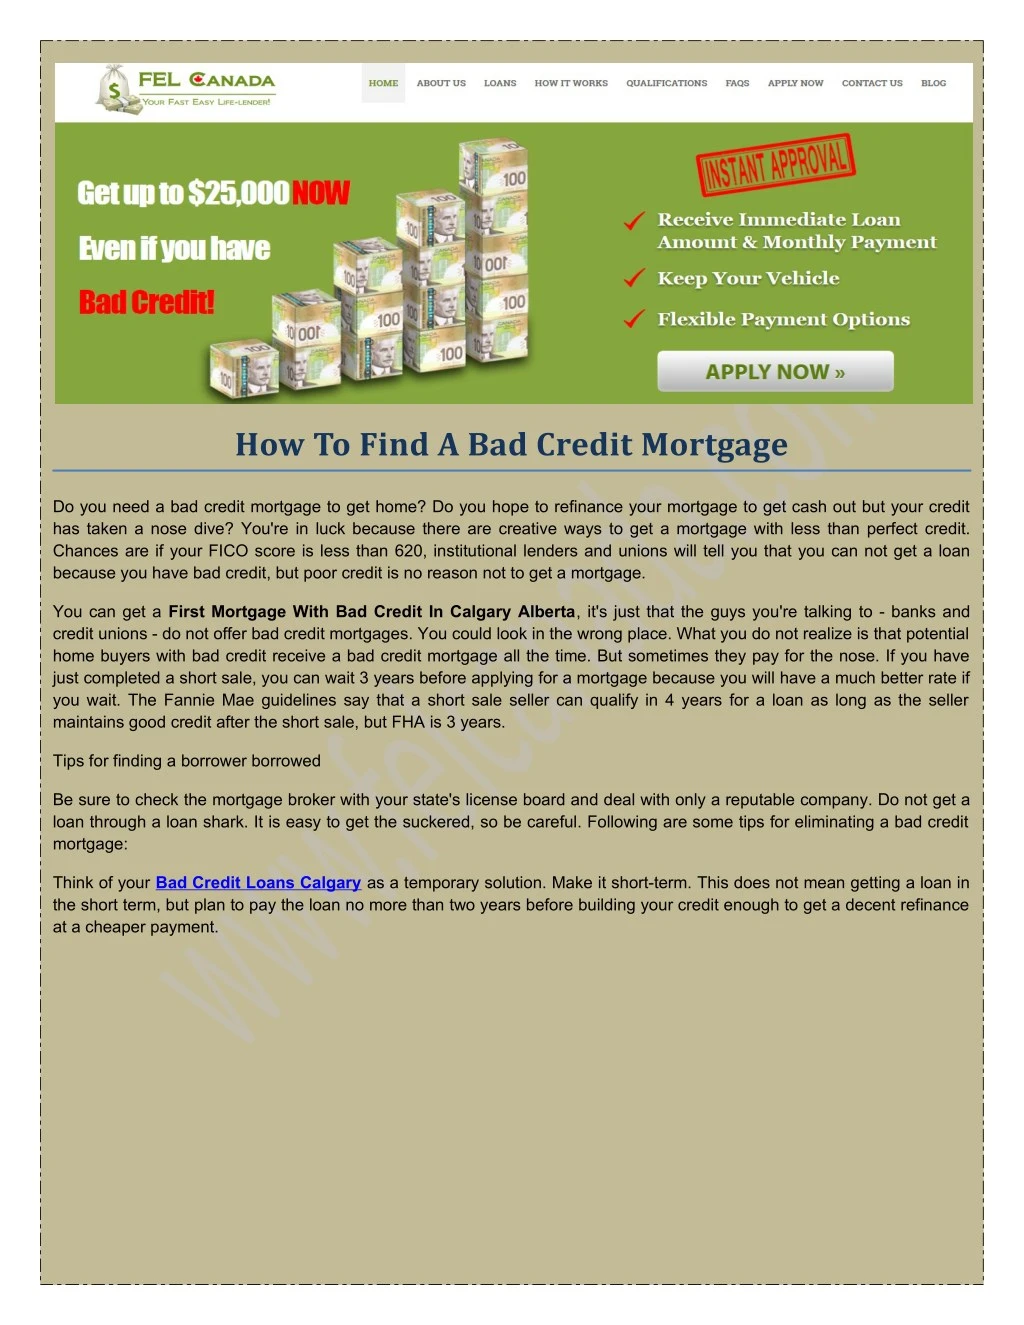 how to find a bad credit mortgage